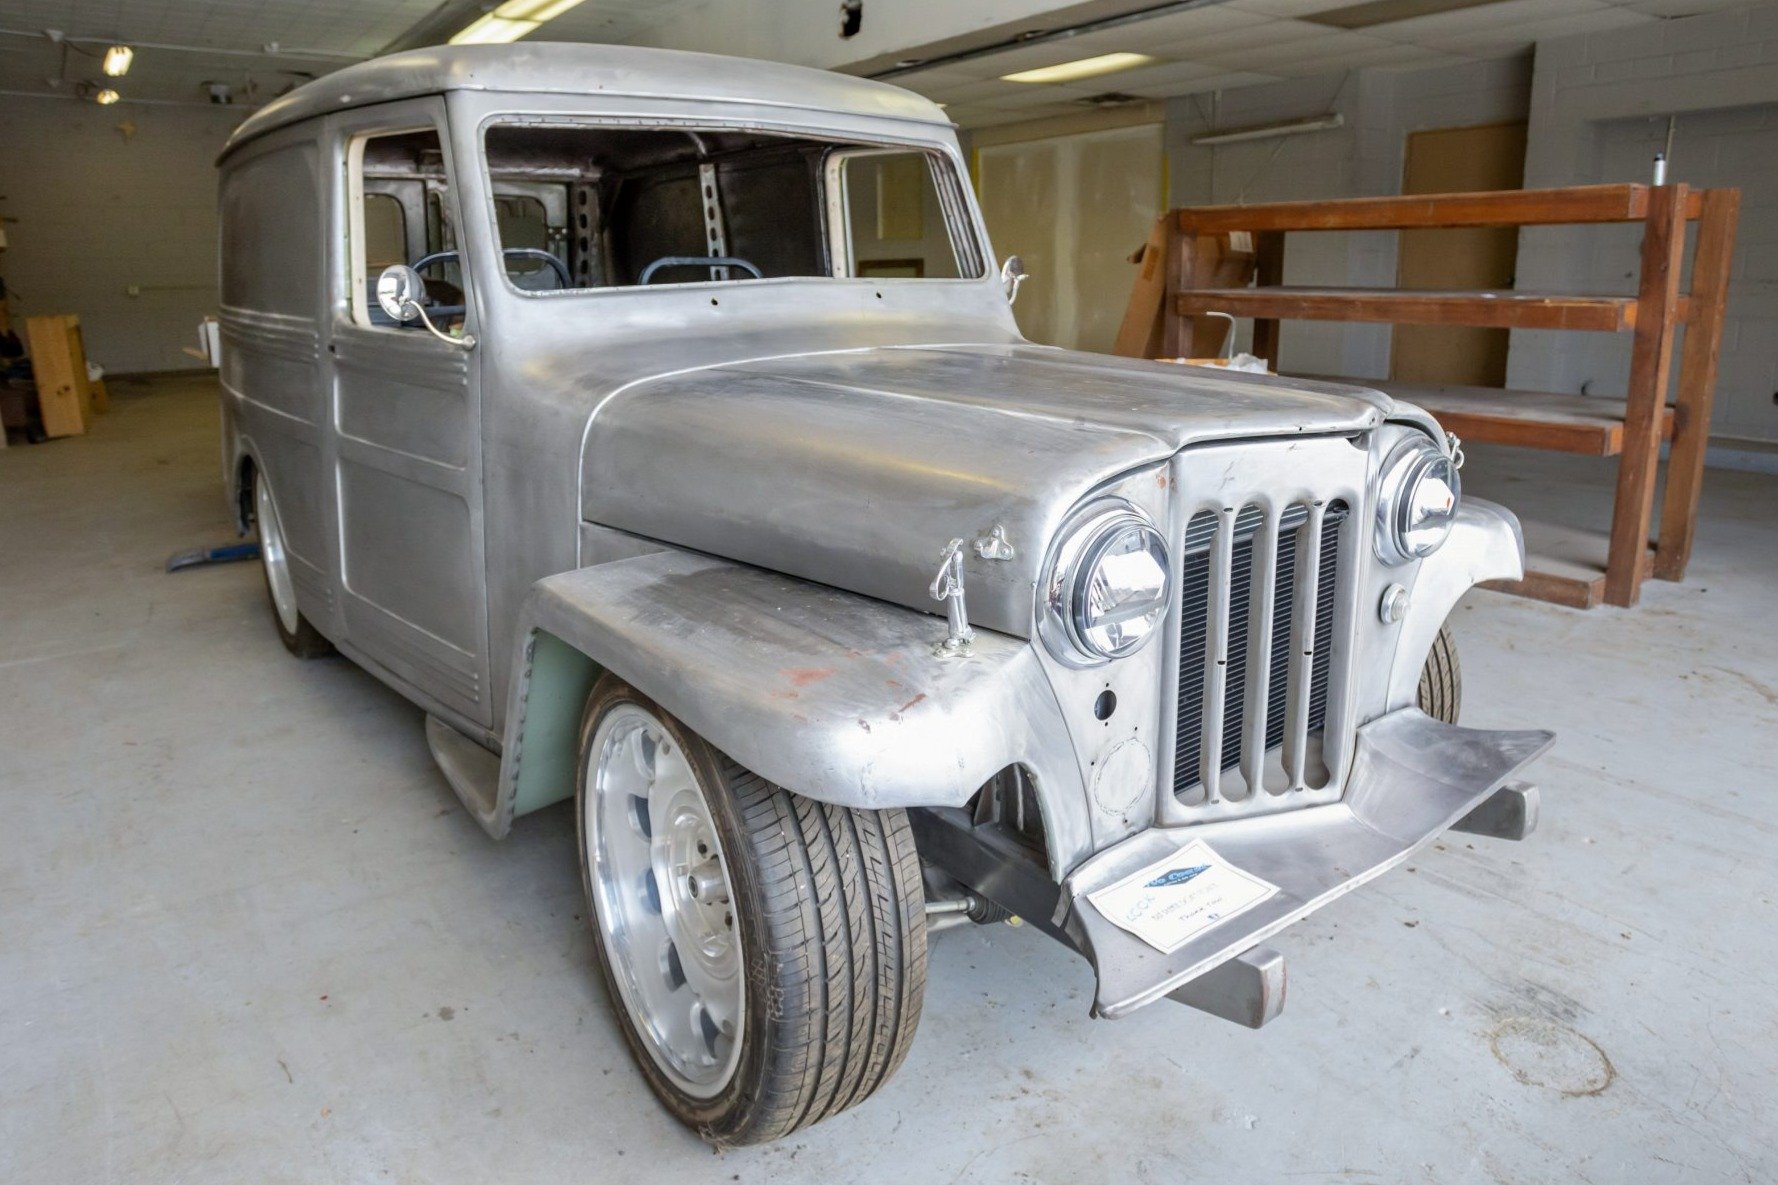 LS3-Equipped 1948 Willys-Overland Sedan Delivery Project at No Reserve